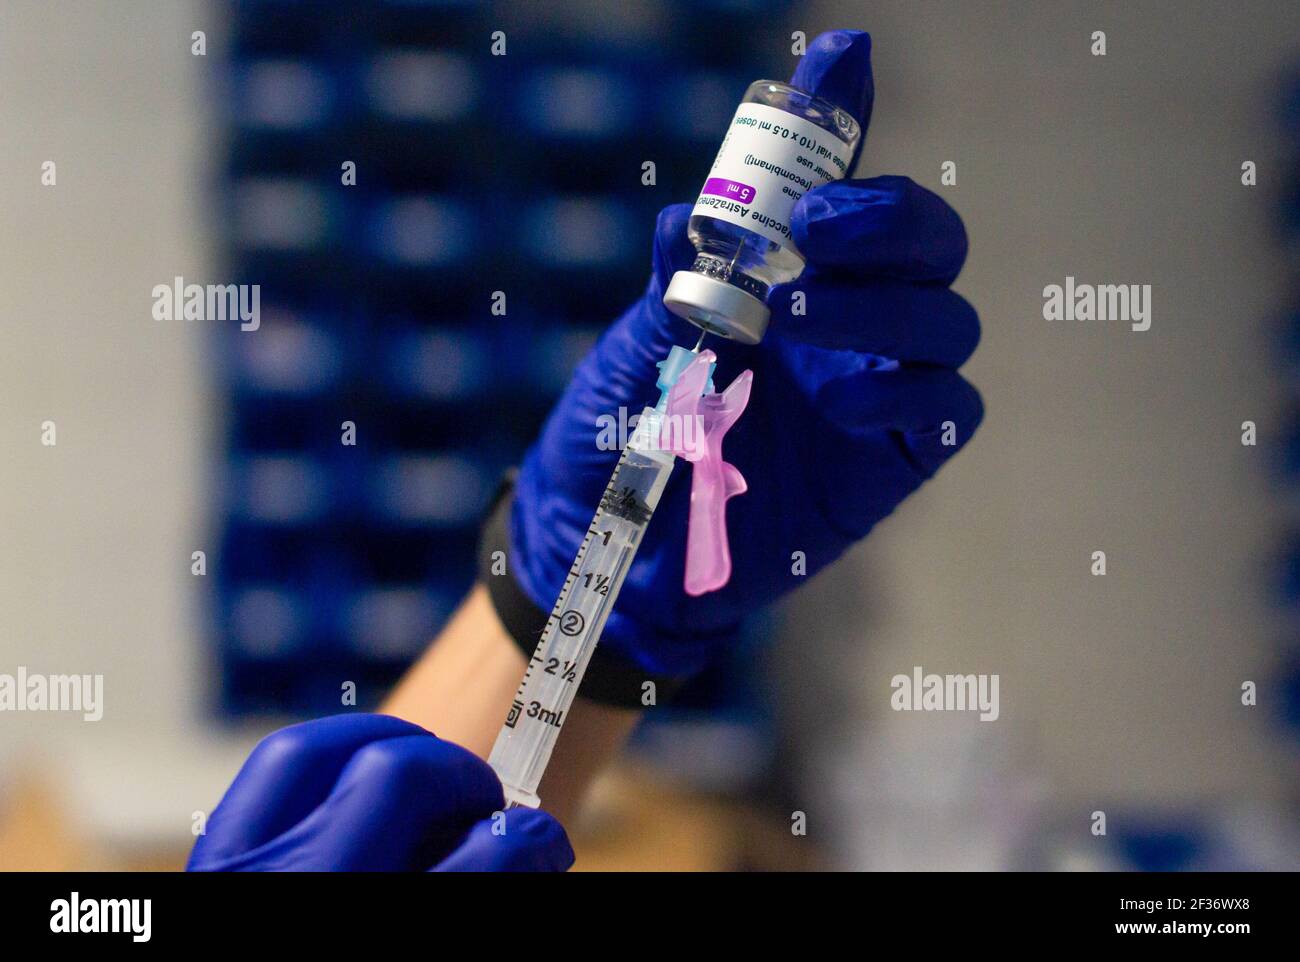 Coria, Spain. 15th Mar, 2021. A healthcare worker prepares a syringe with the Astra Zeneca Covid19 dose at Coria City Hospital. Some European countries have cancelled the administration of AstraZeneca vaccine due the appearance of some side effects in people who had received it recently. (Photo by Gustavo Valiente/SOPA Images/Sipa USA) Credit: Sipa USA/Alamy Live News Stock Photo